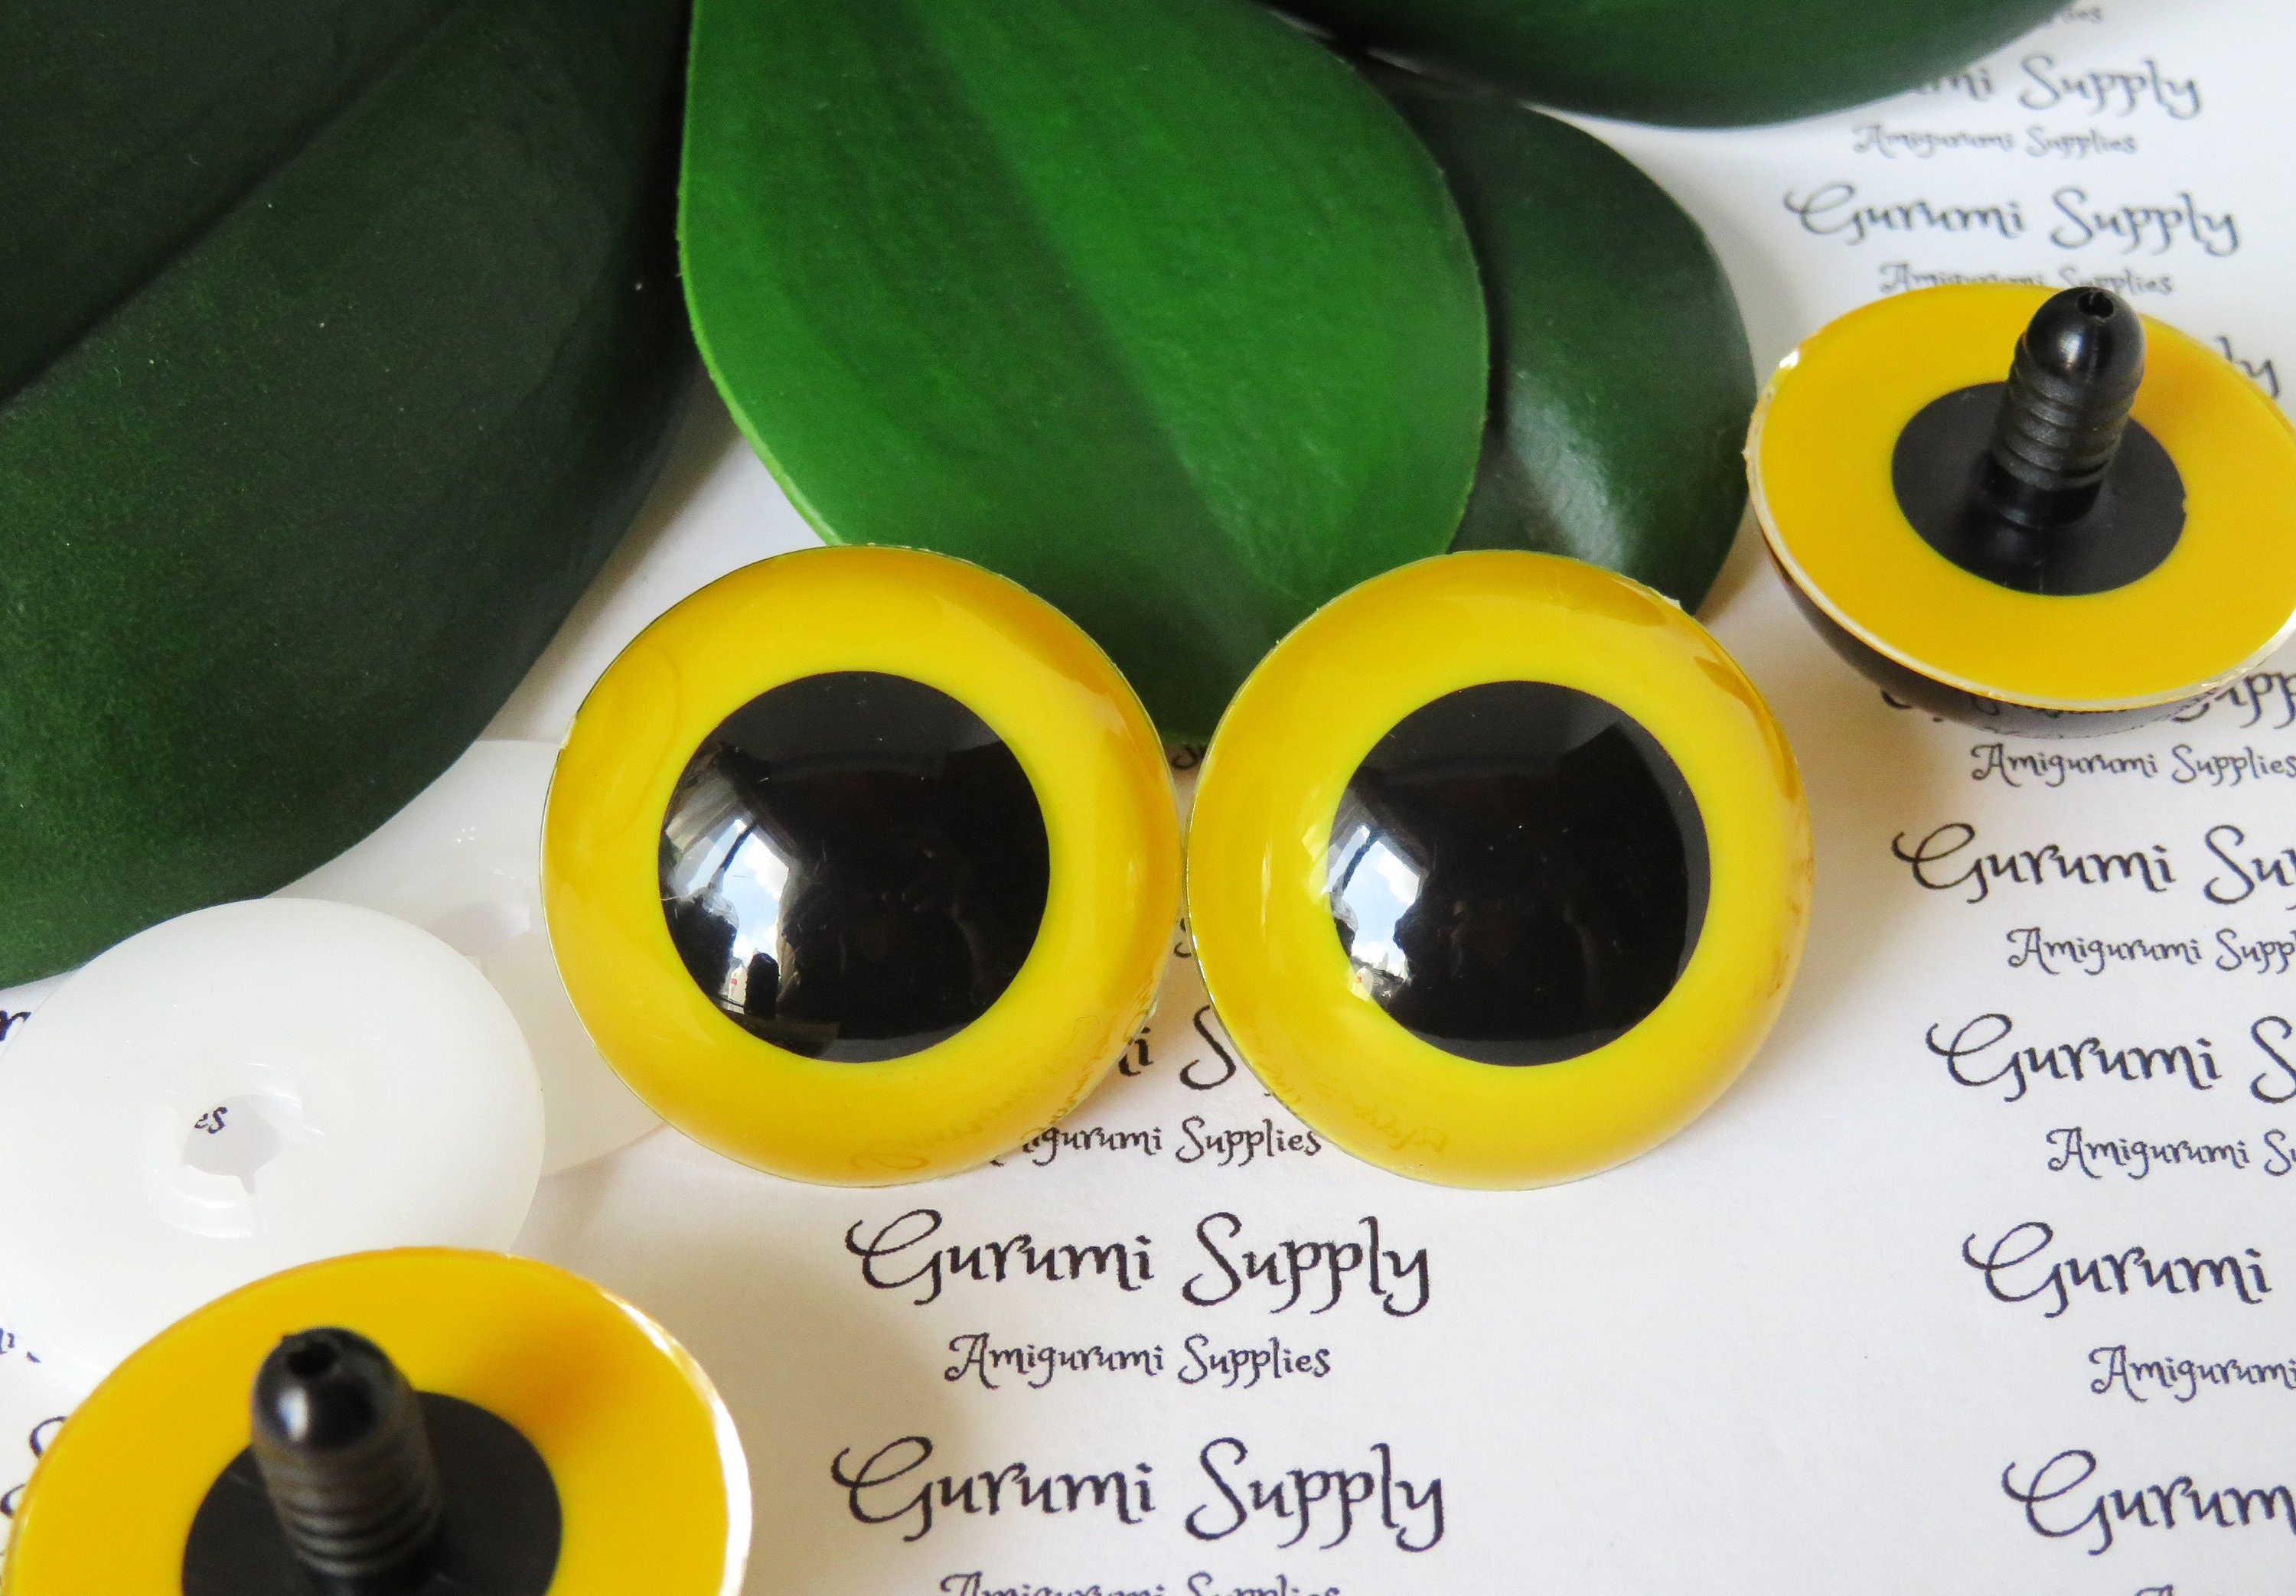 15x20mm Solid Matte Black Safety Noses With Washers 4 Ct / Amigurumi /  Animal / Doll / Craft / Stuffed Creations / Crochet / Knit / Bear 